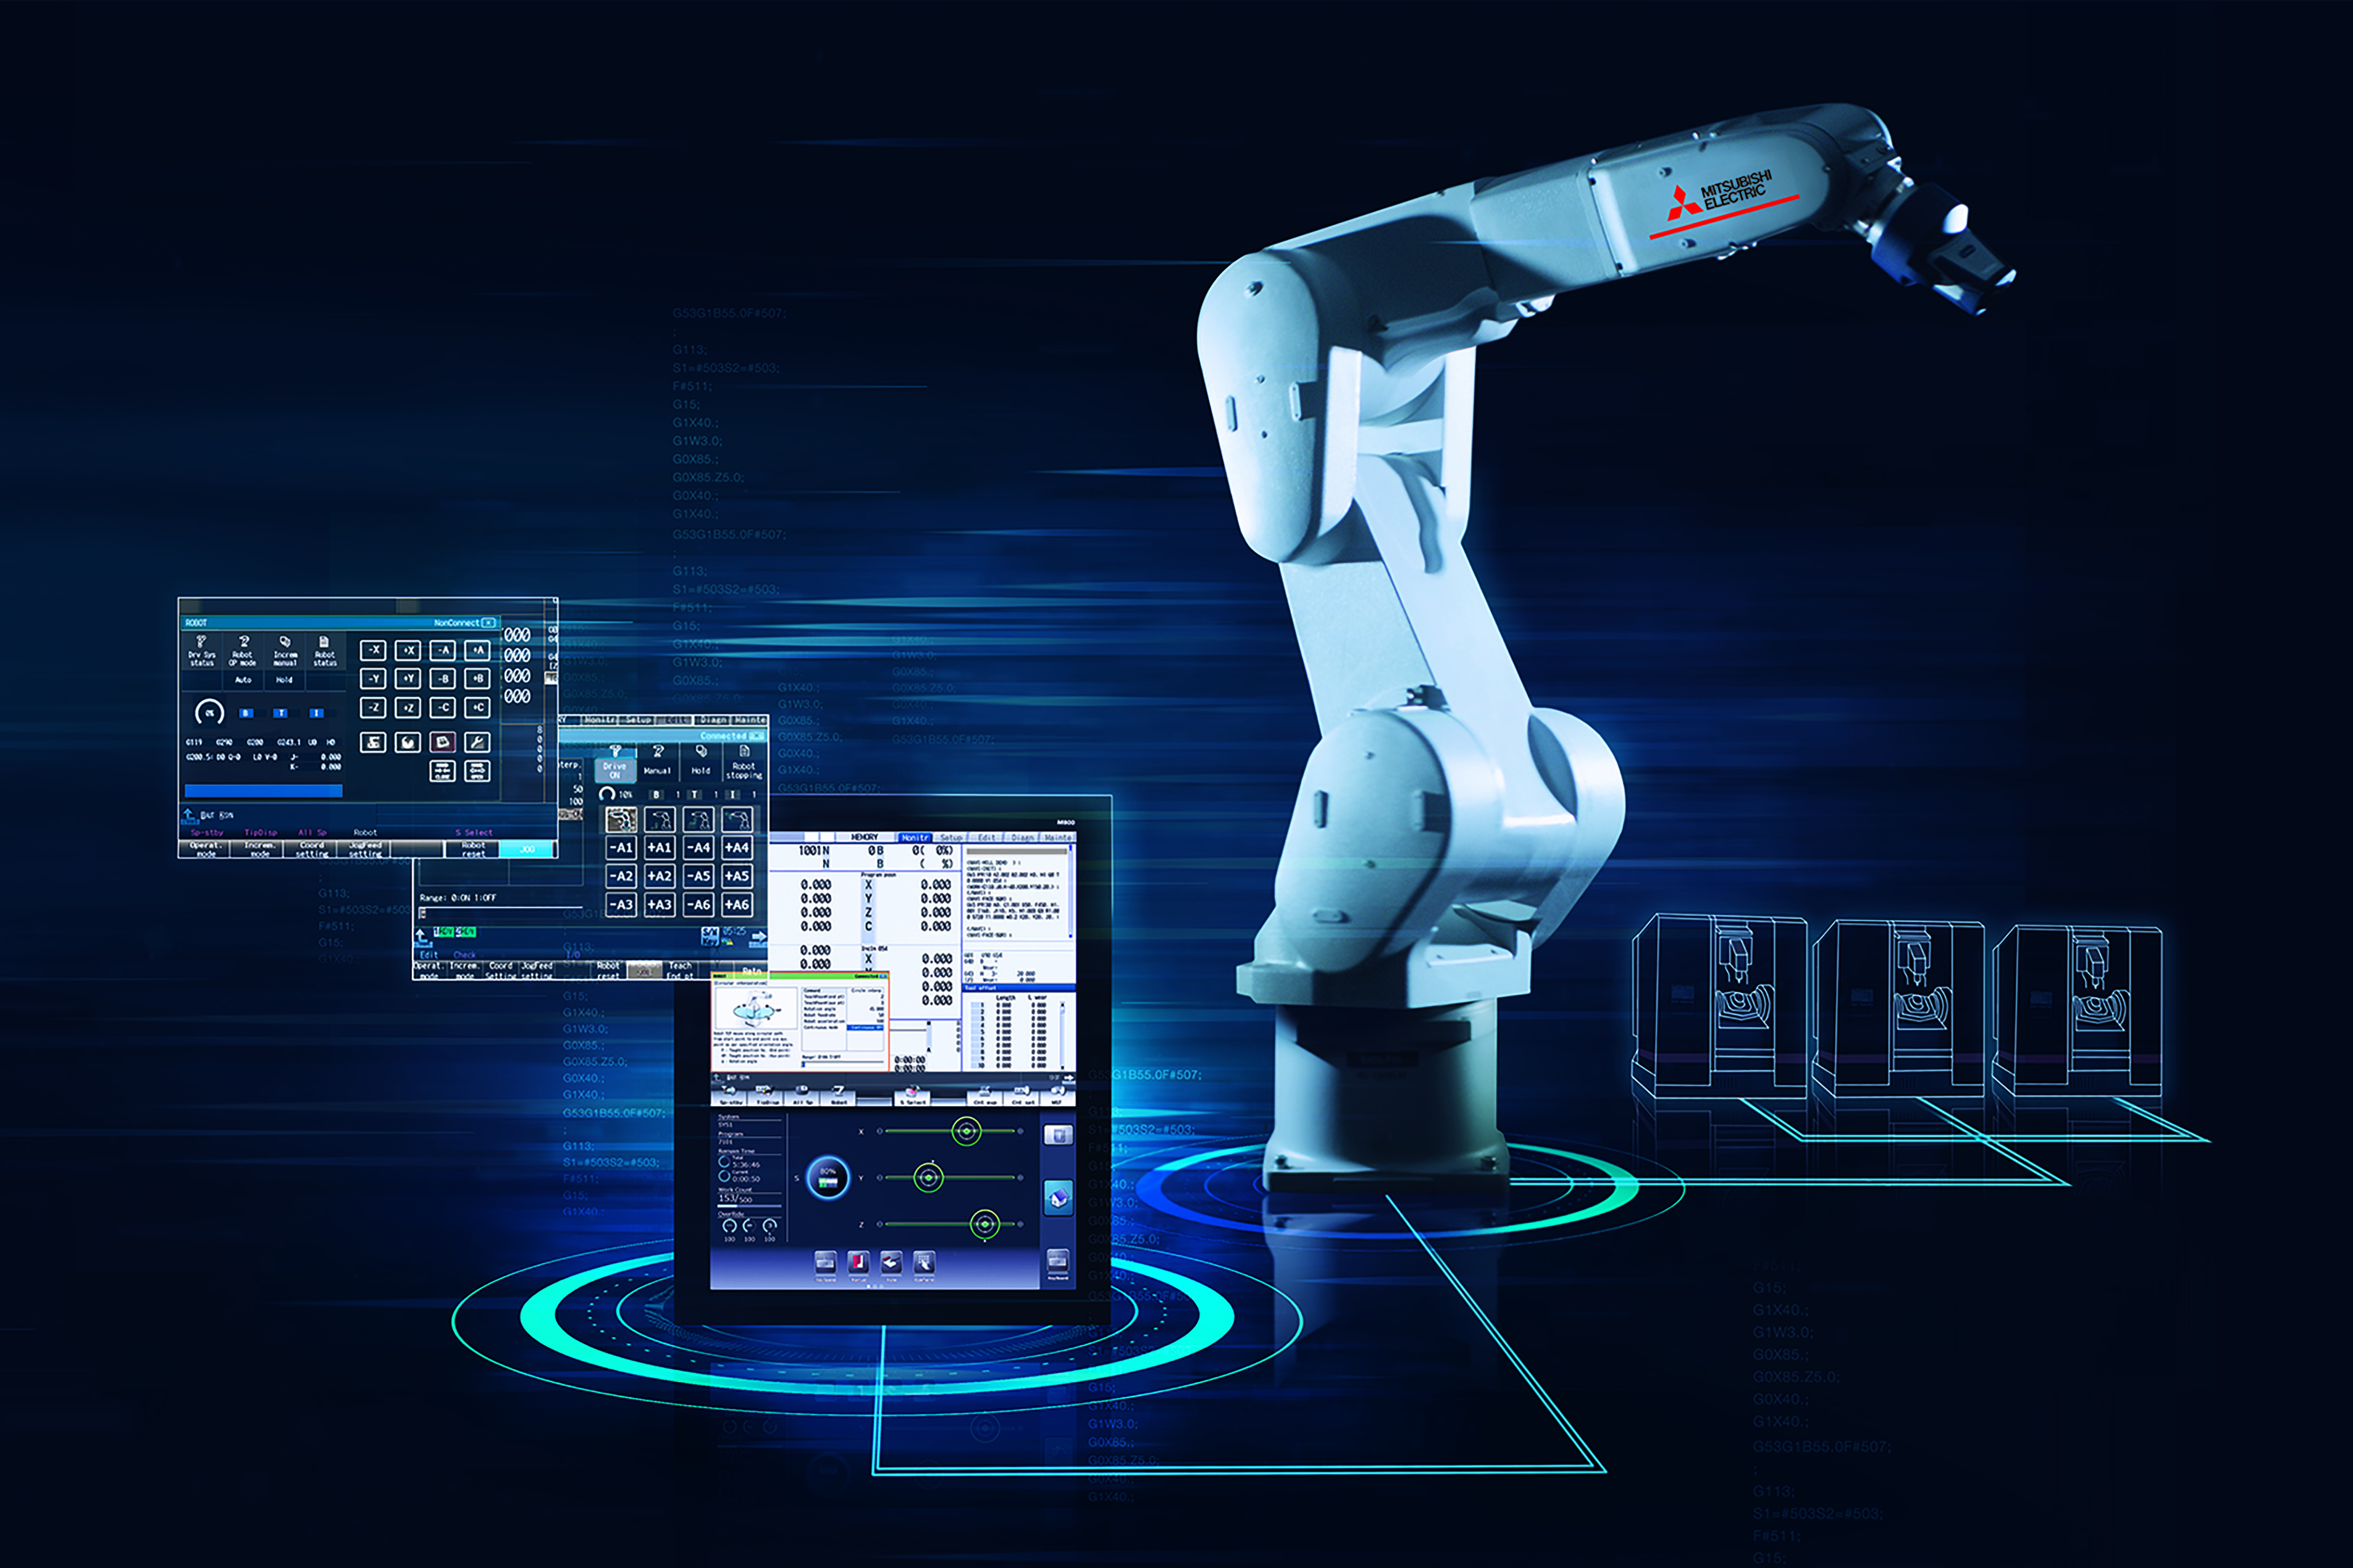 With Mitsubishi Electric’s Direct Robot Control, a robot can be programmed using G-Code in the CNC machining centre itself.